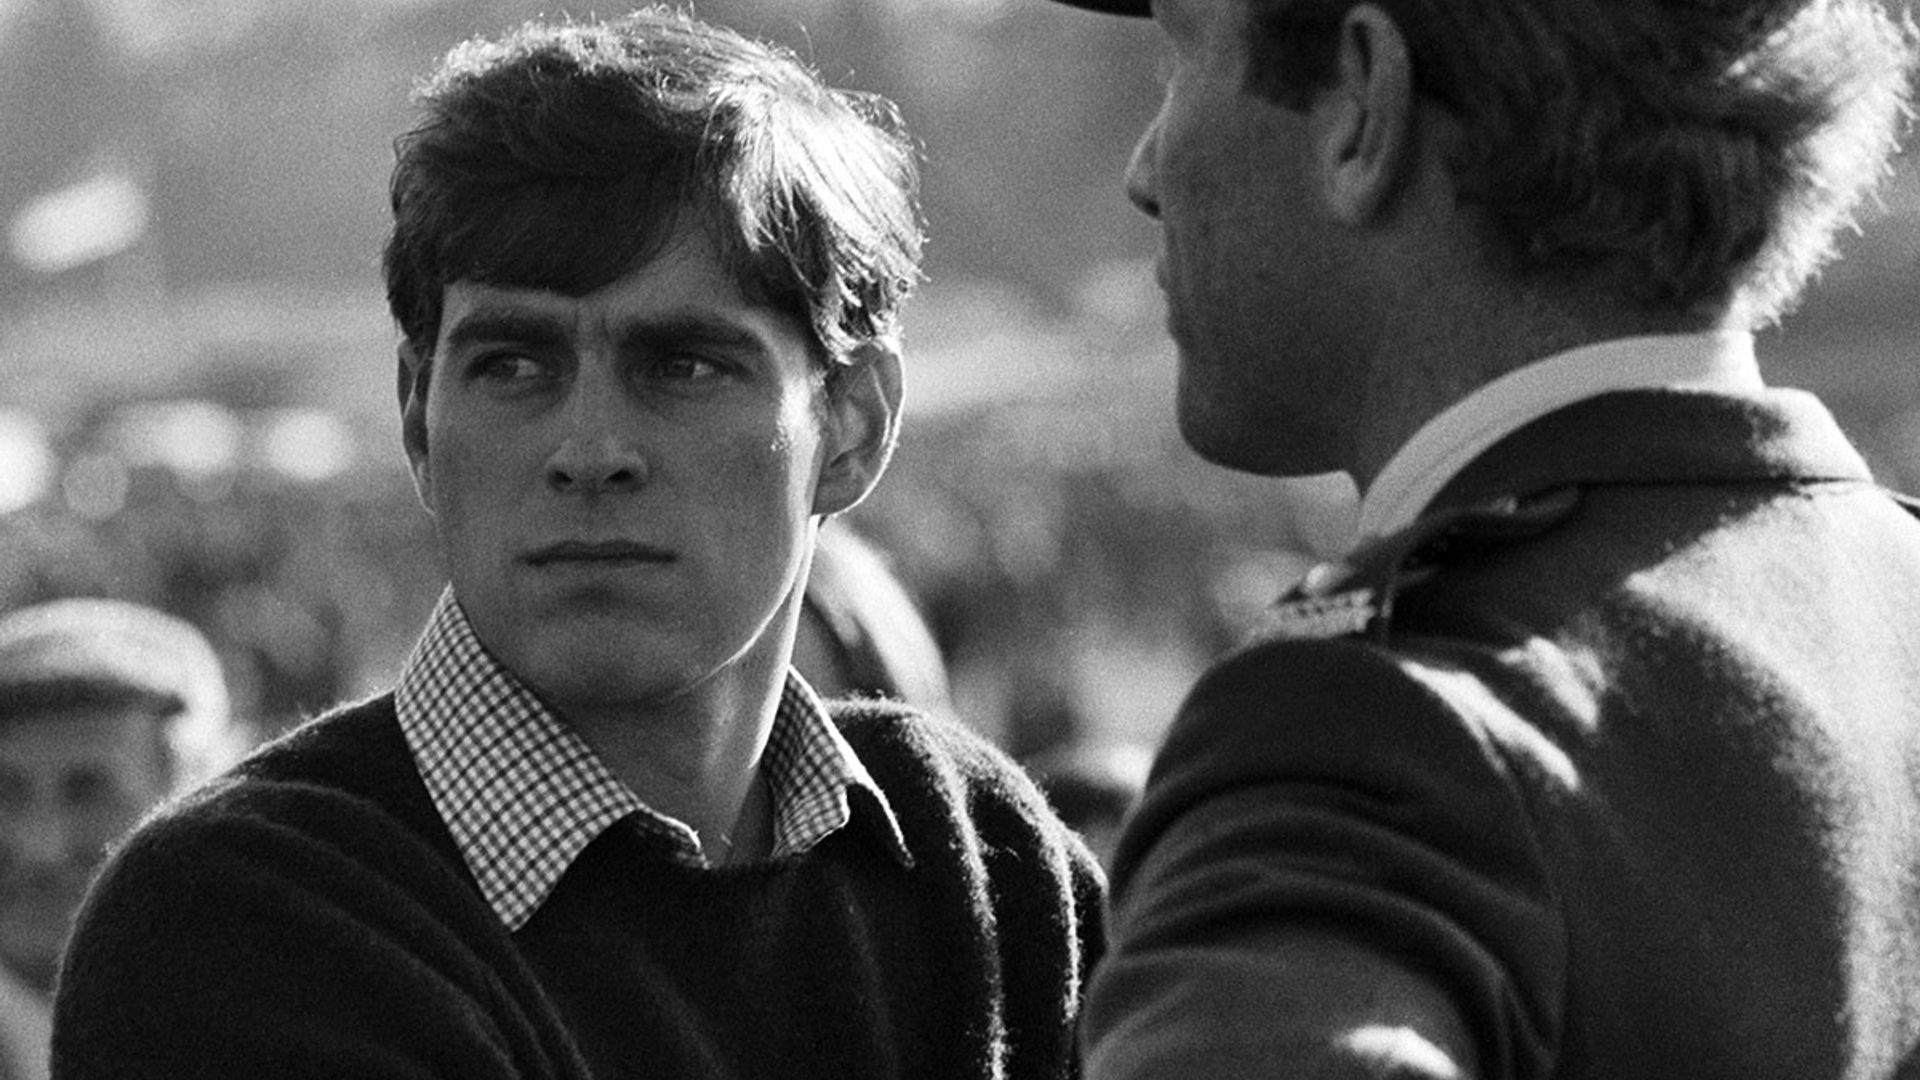 Has this actor been cast as Prince Andrew in The Crown?